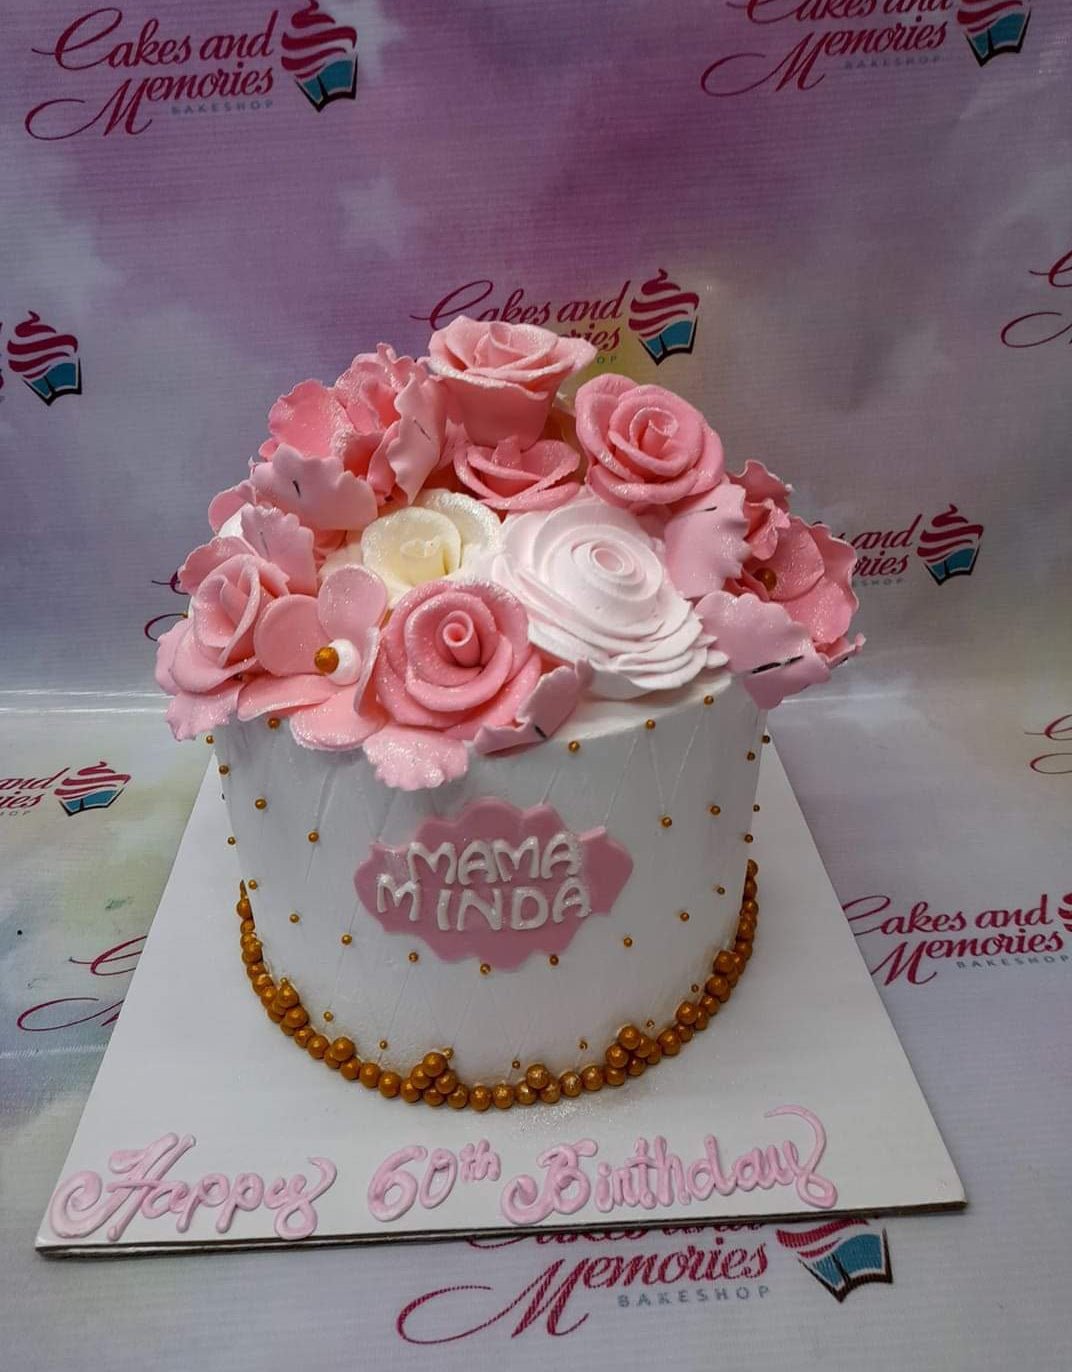 Adding a Floral Touch: Our Birthday Cake Ideas | Interflora